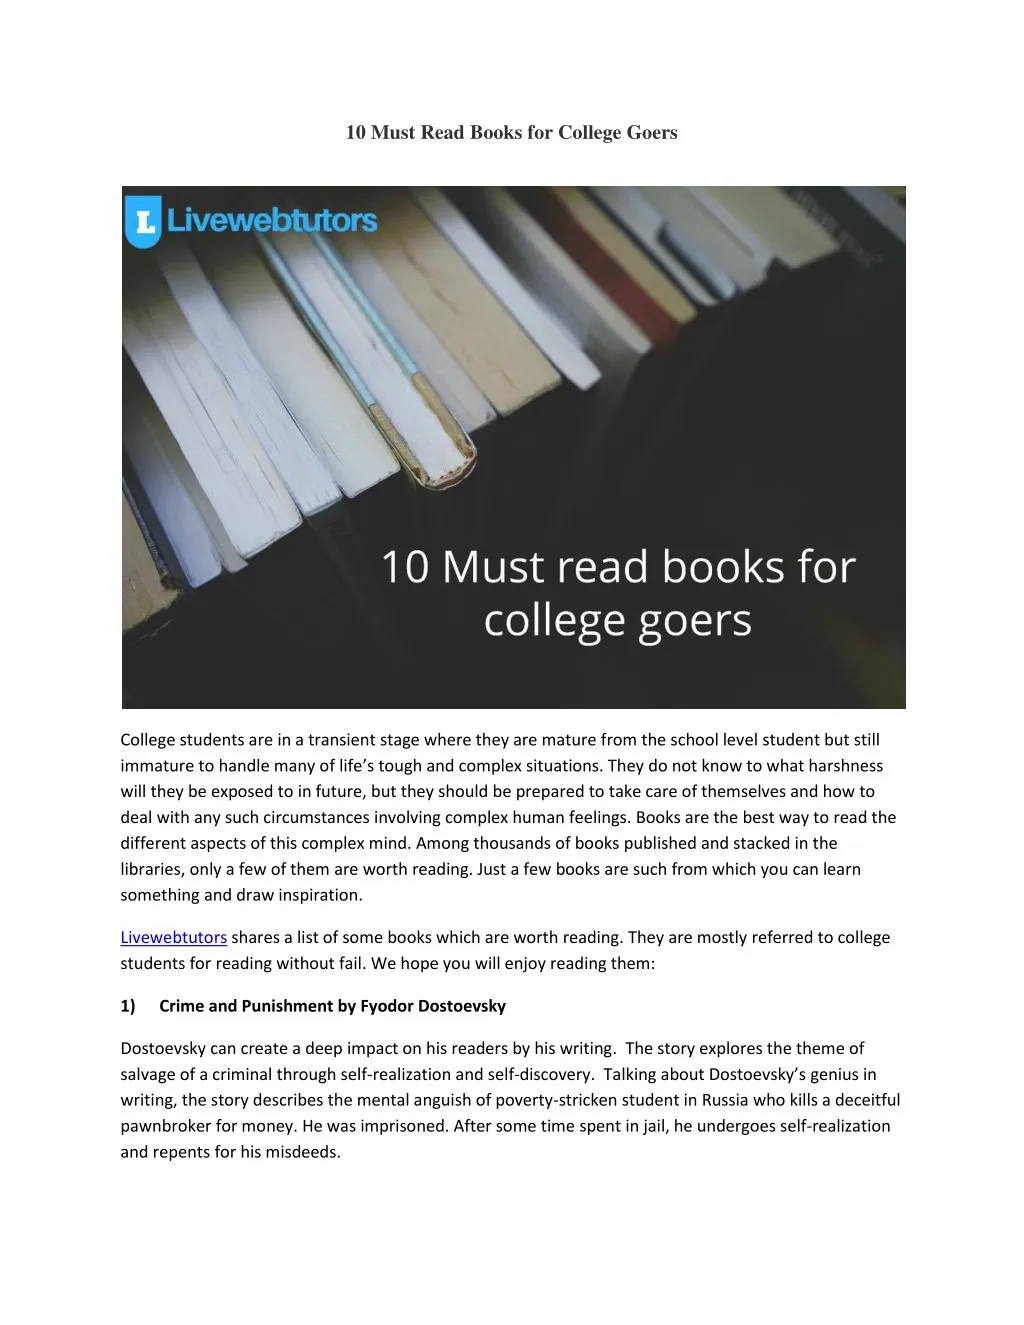 10 must read books for college goers